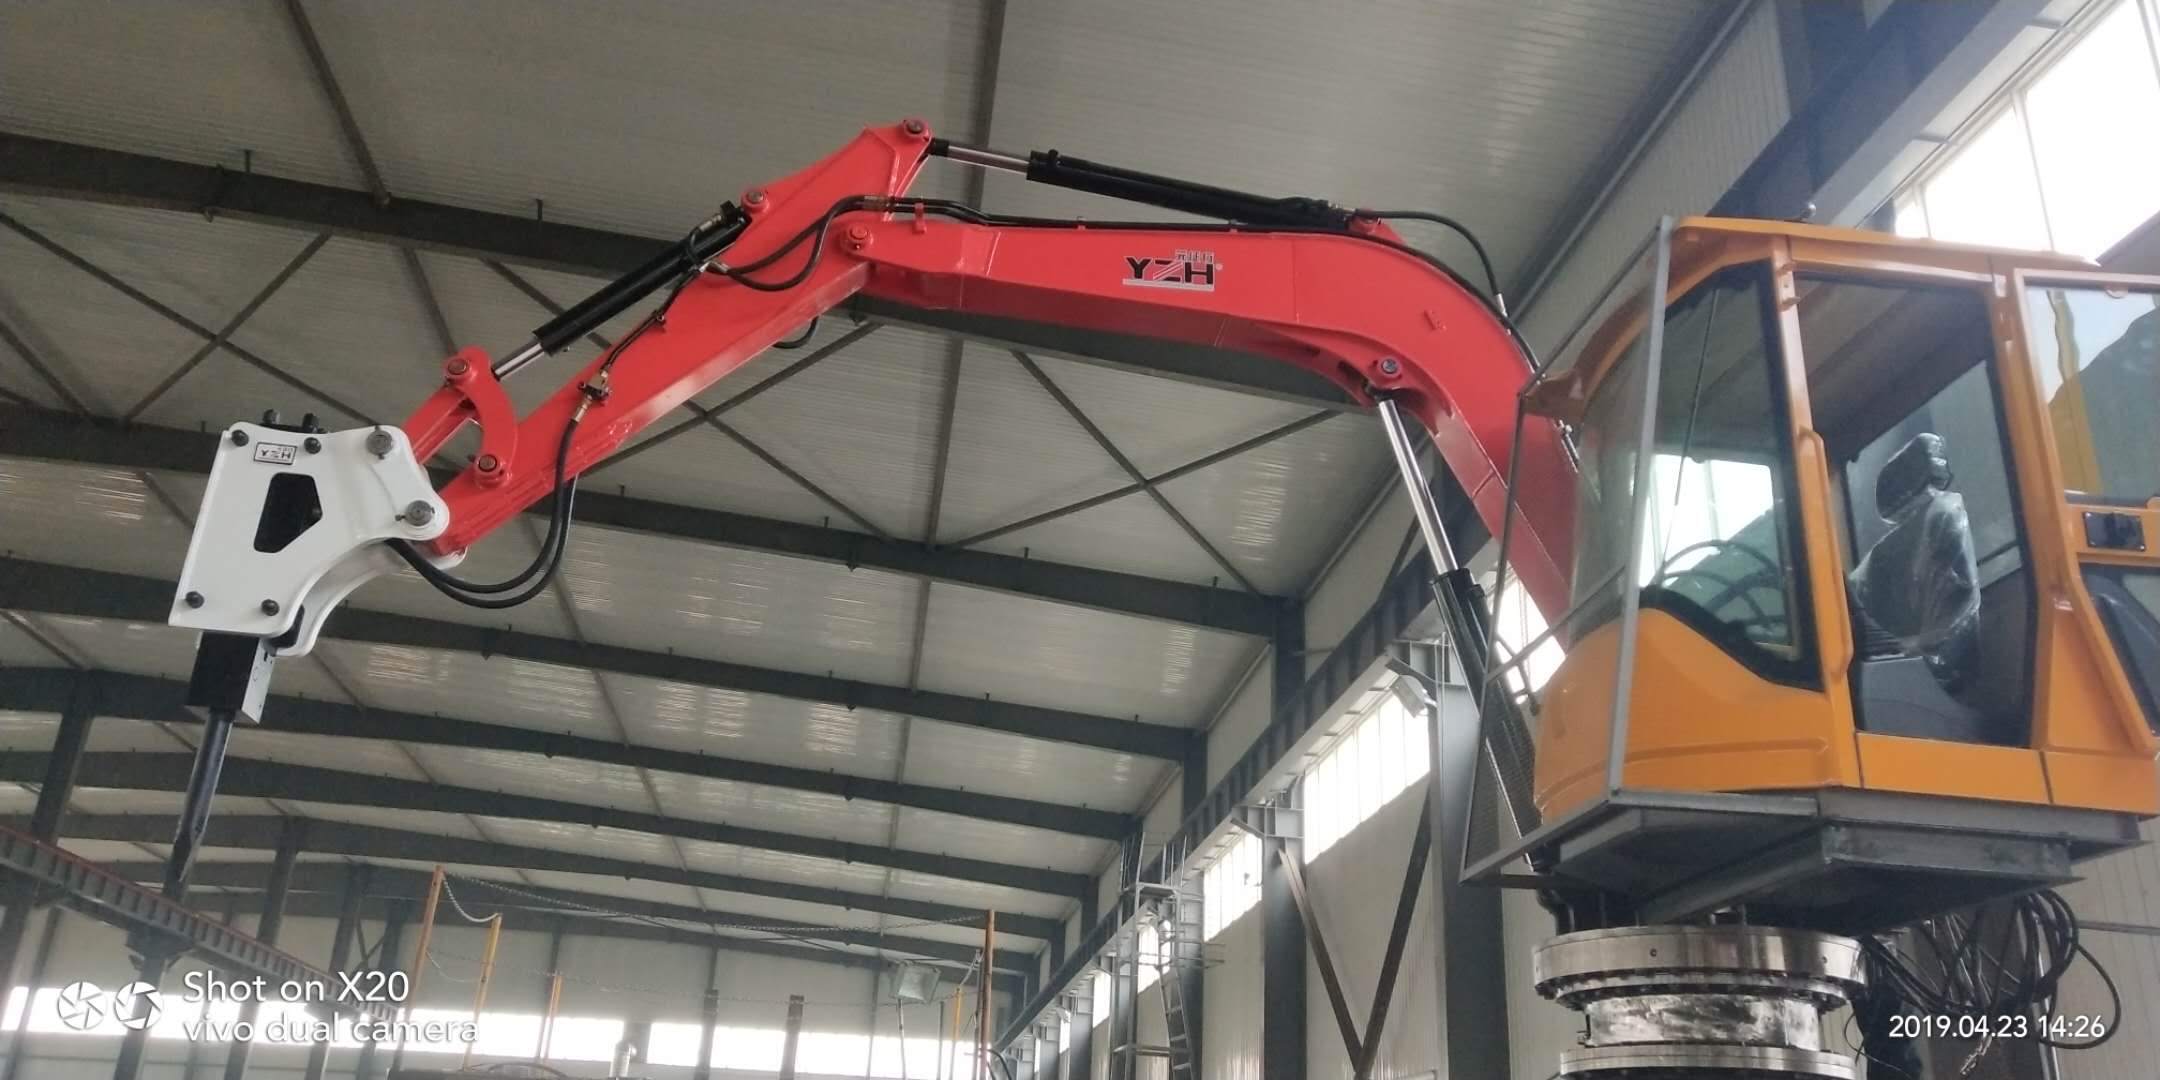 Stationary Pedestal Boom Breaker System Has Been Delivered To Shandong Gold Mining Company